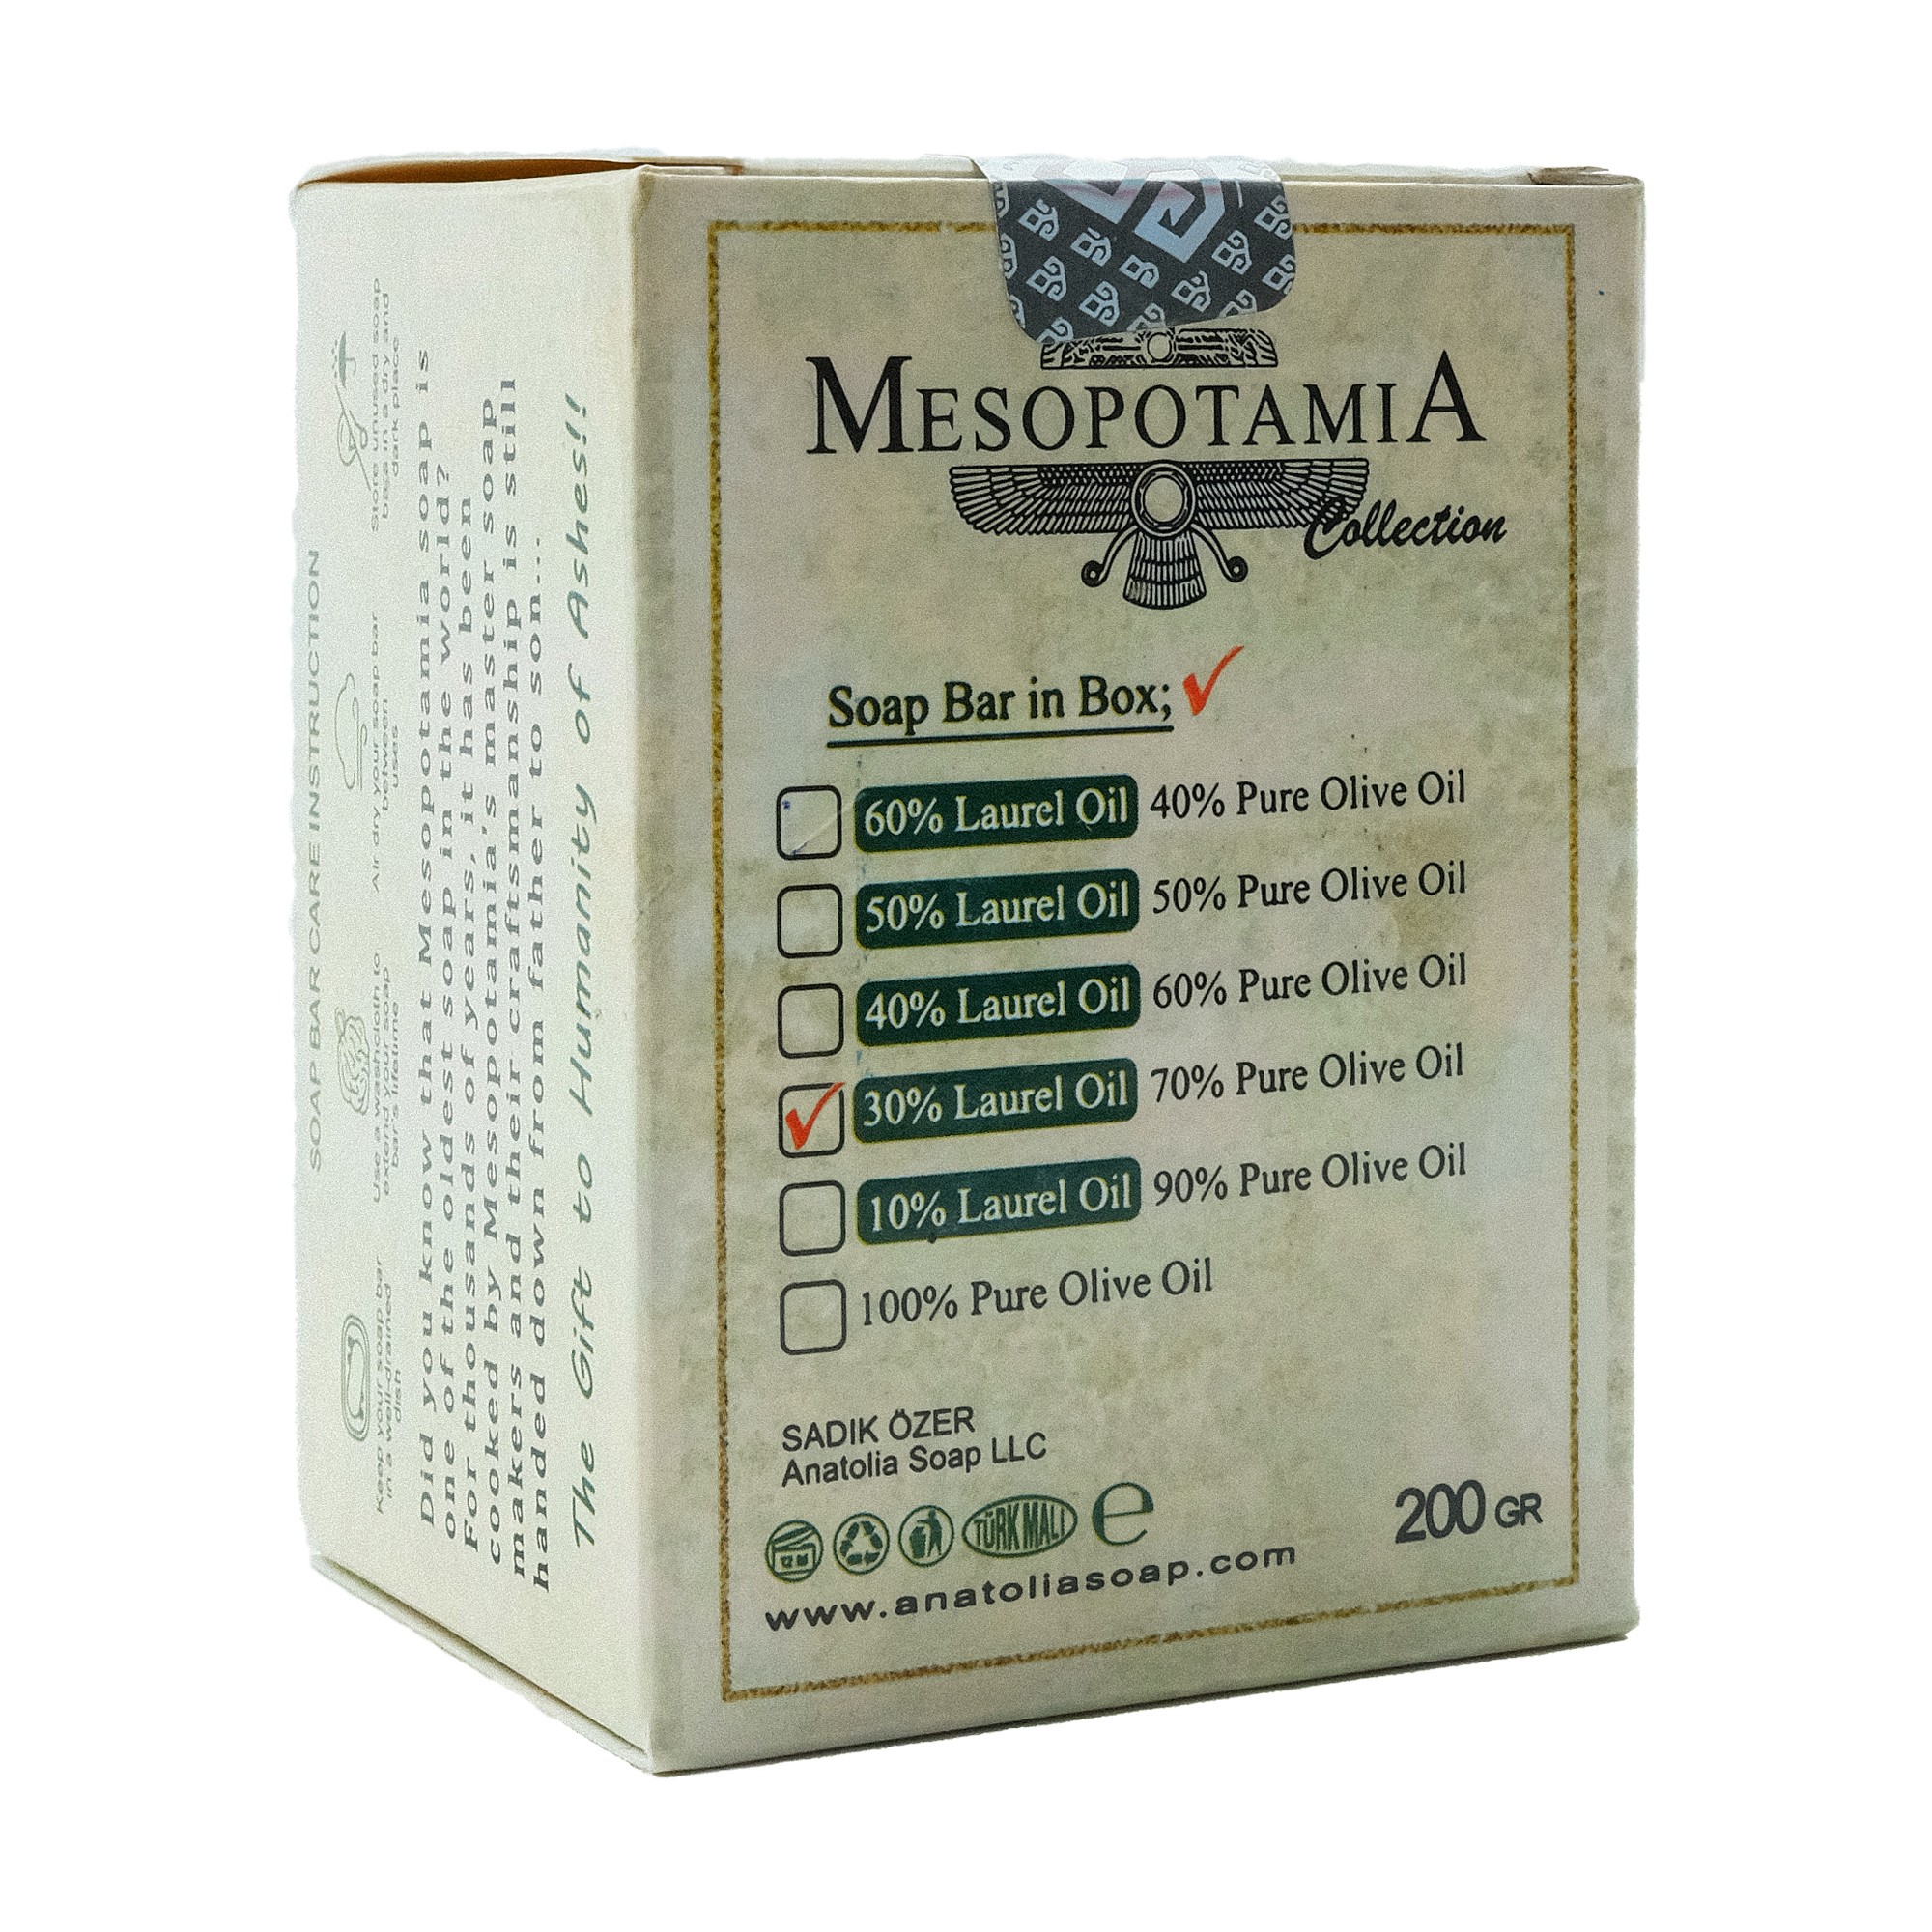 Mesopotamia 180 G Aleppo Soap with 30% Laurel  and 70% Olive Oil Organic Handmade Natural Moisturizer for Dry and Normal Skin